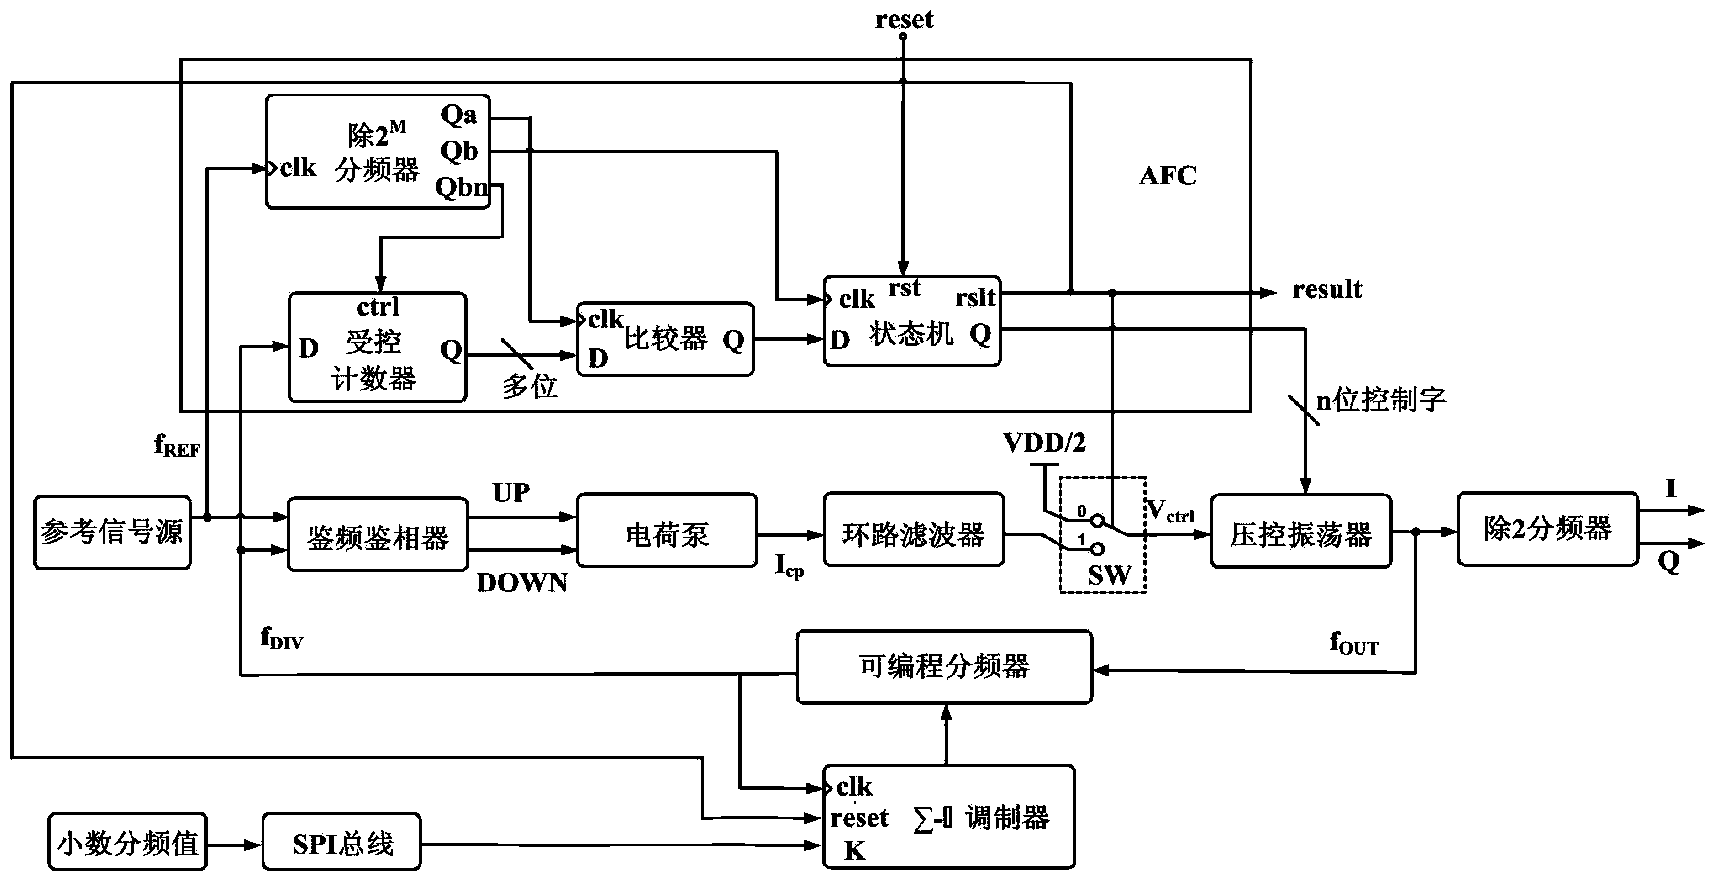 Automatic frequency calibration circuit for sigma-delta fractional frequency synthesizer